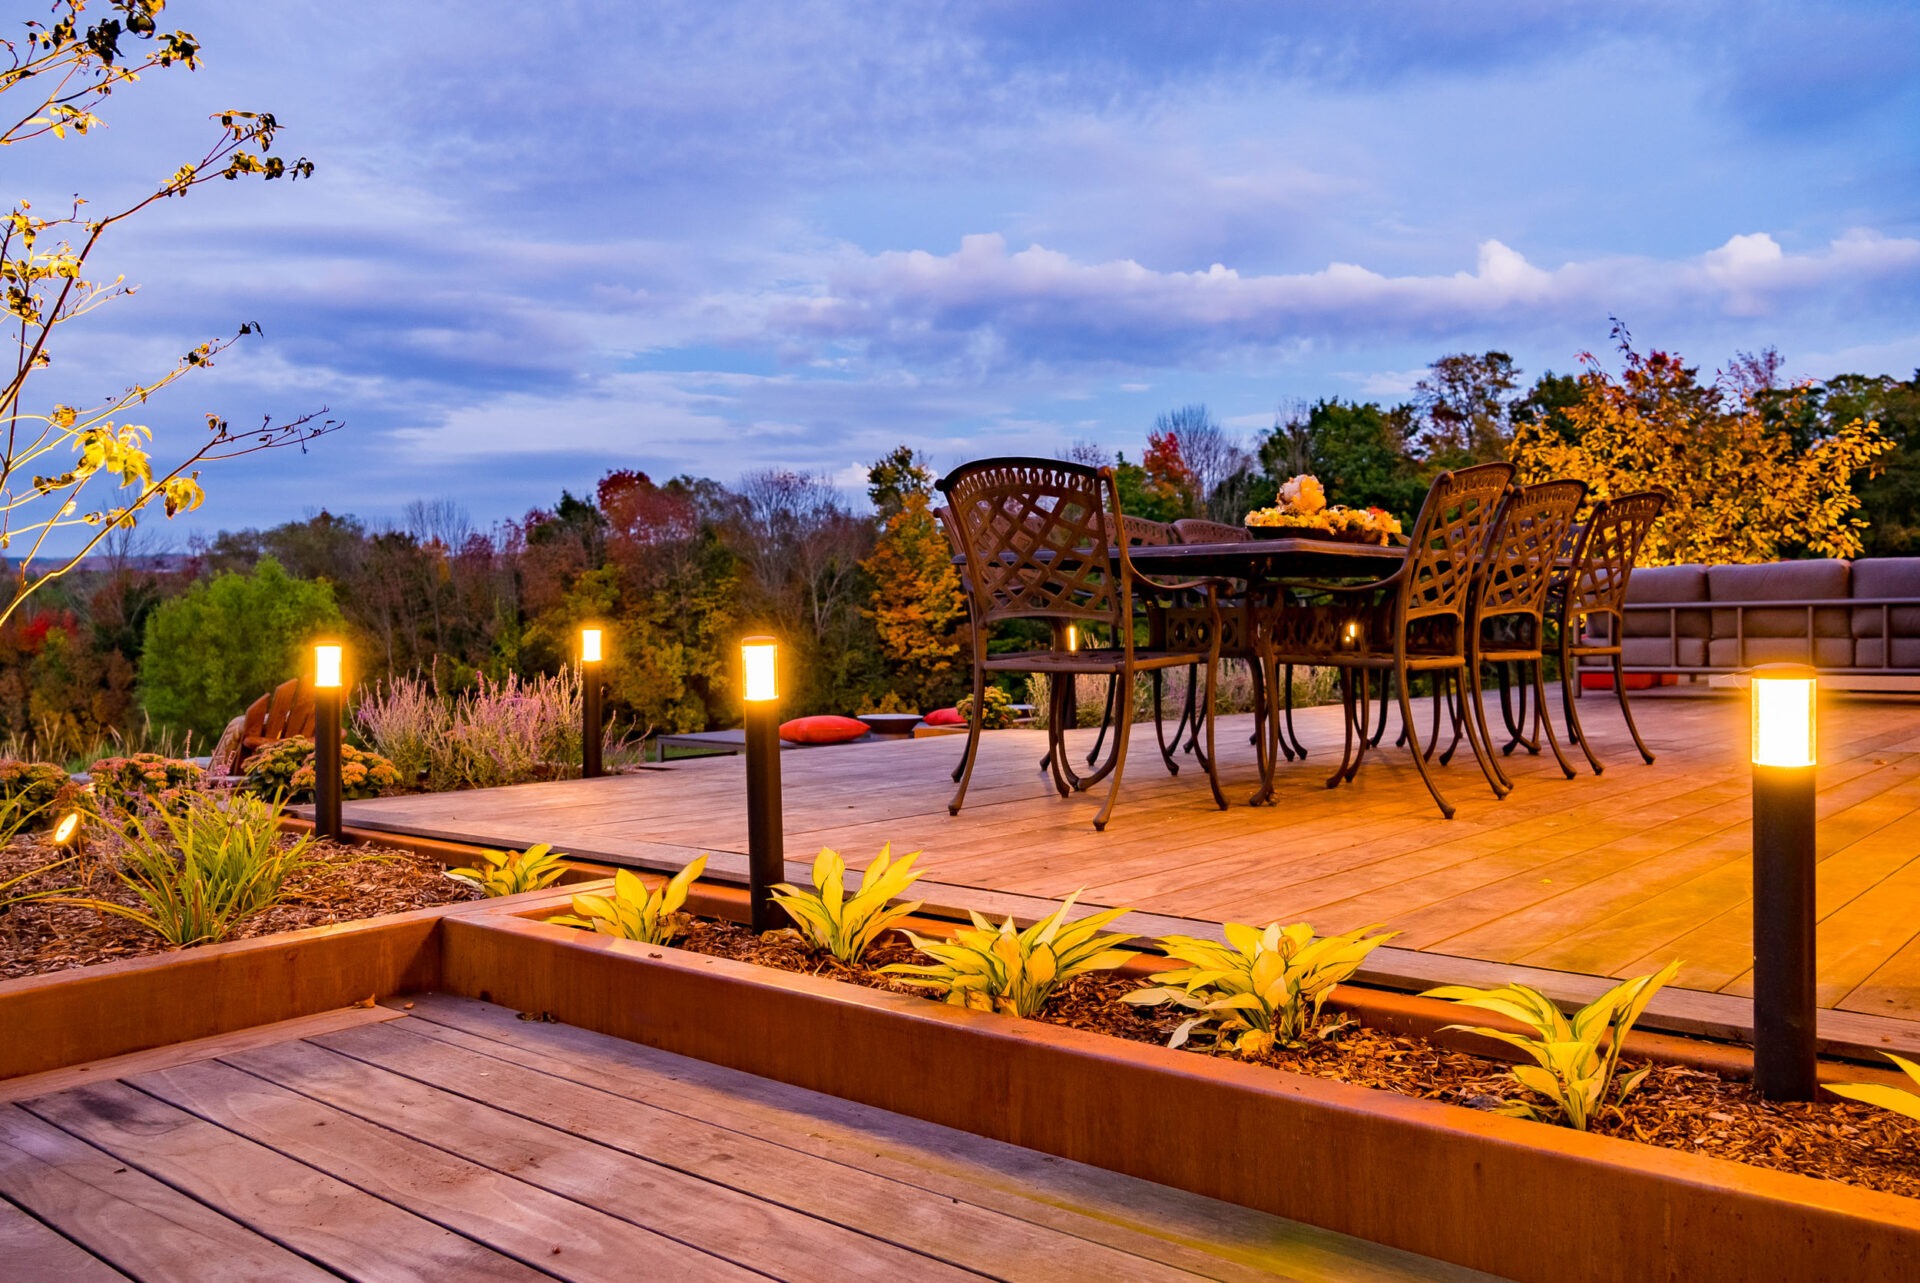 An inviting outdoor wooden deck features a dining set, warm lighting, and a backdrop of trees with autumnal colors at dusk.